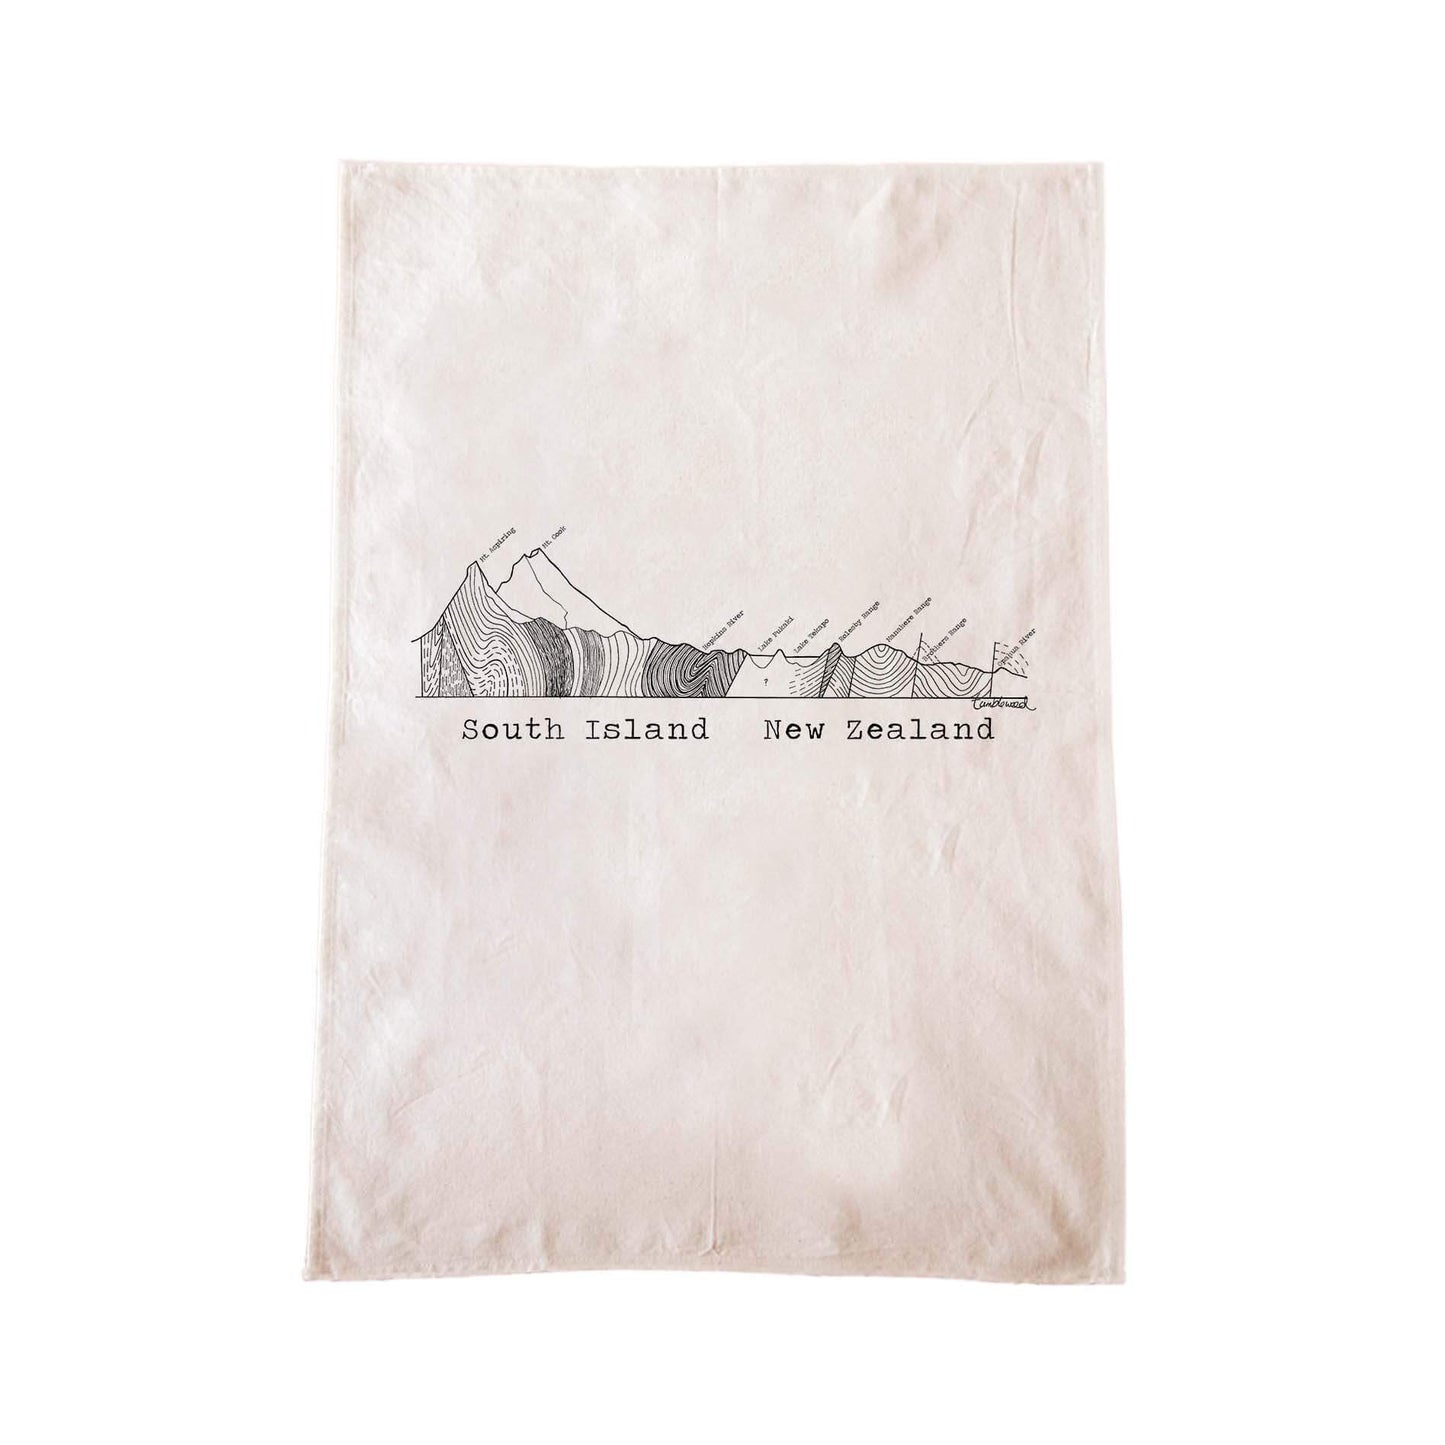 Off-white cotton tea towel with a screen printed South Island Cross Section design.